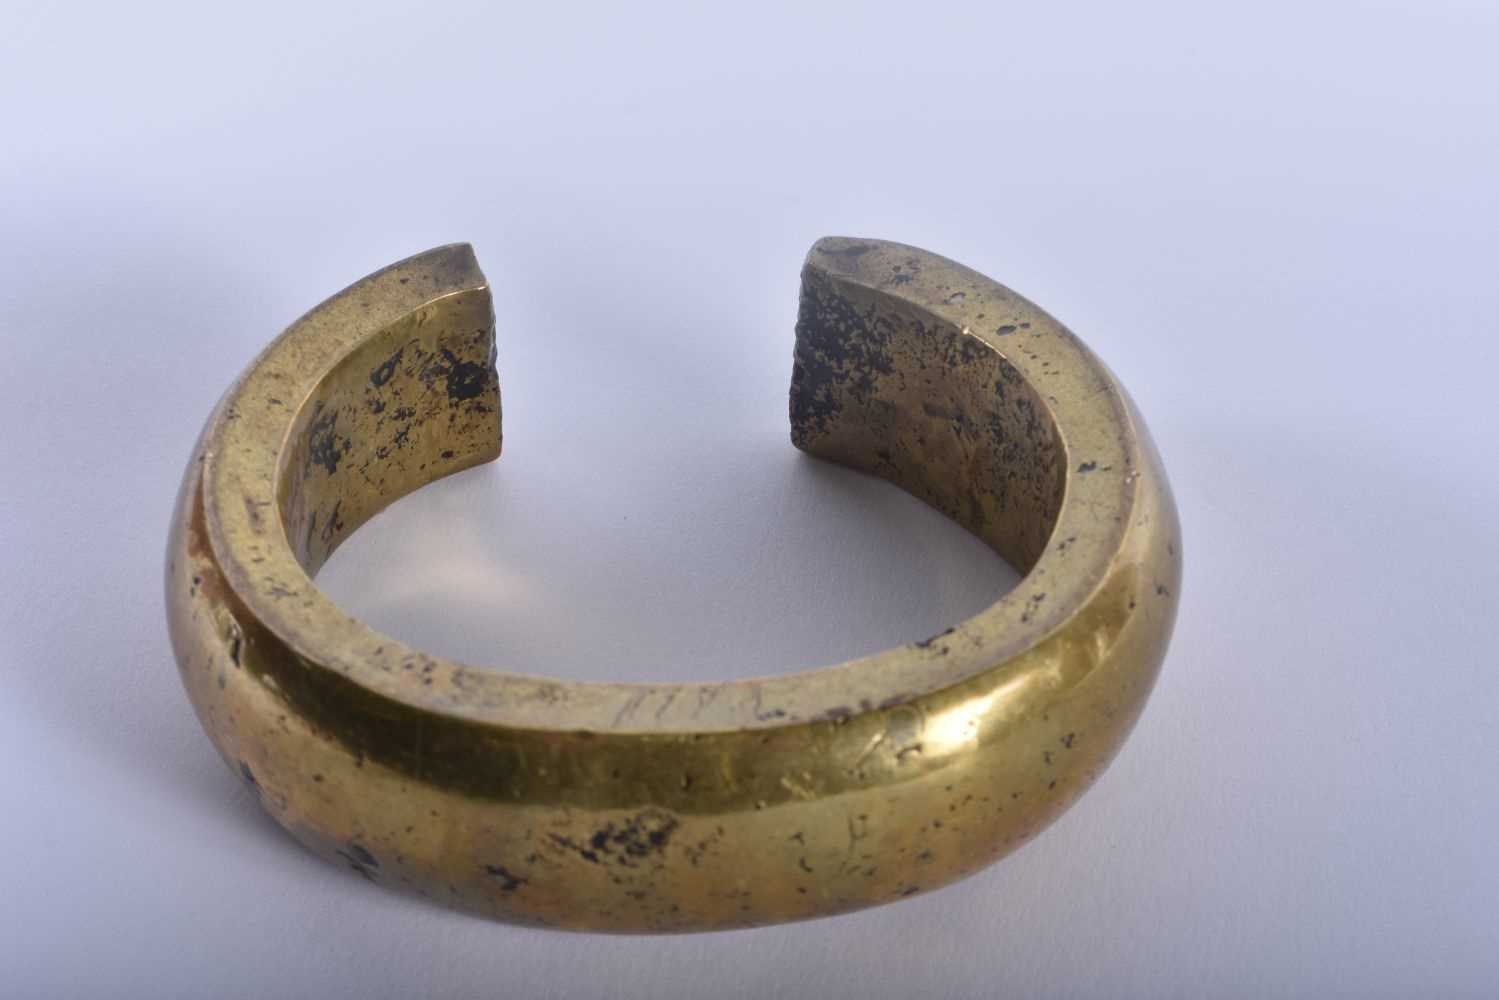 AN EARLY AFRICAN EASTERN ASIAN BRONZE TRIBAL BRONZE BANGLE. 10 cm wide. - Image 3 of 3